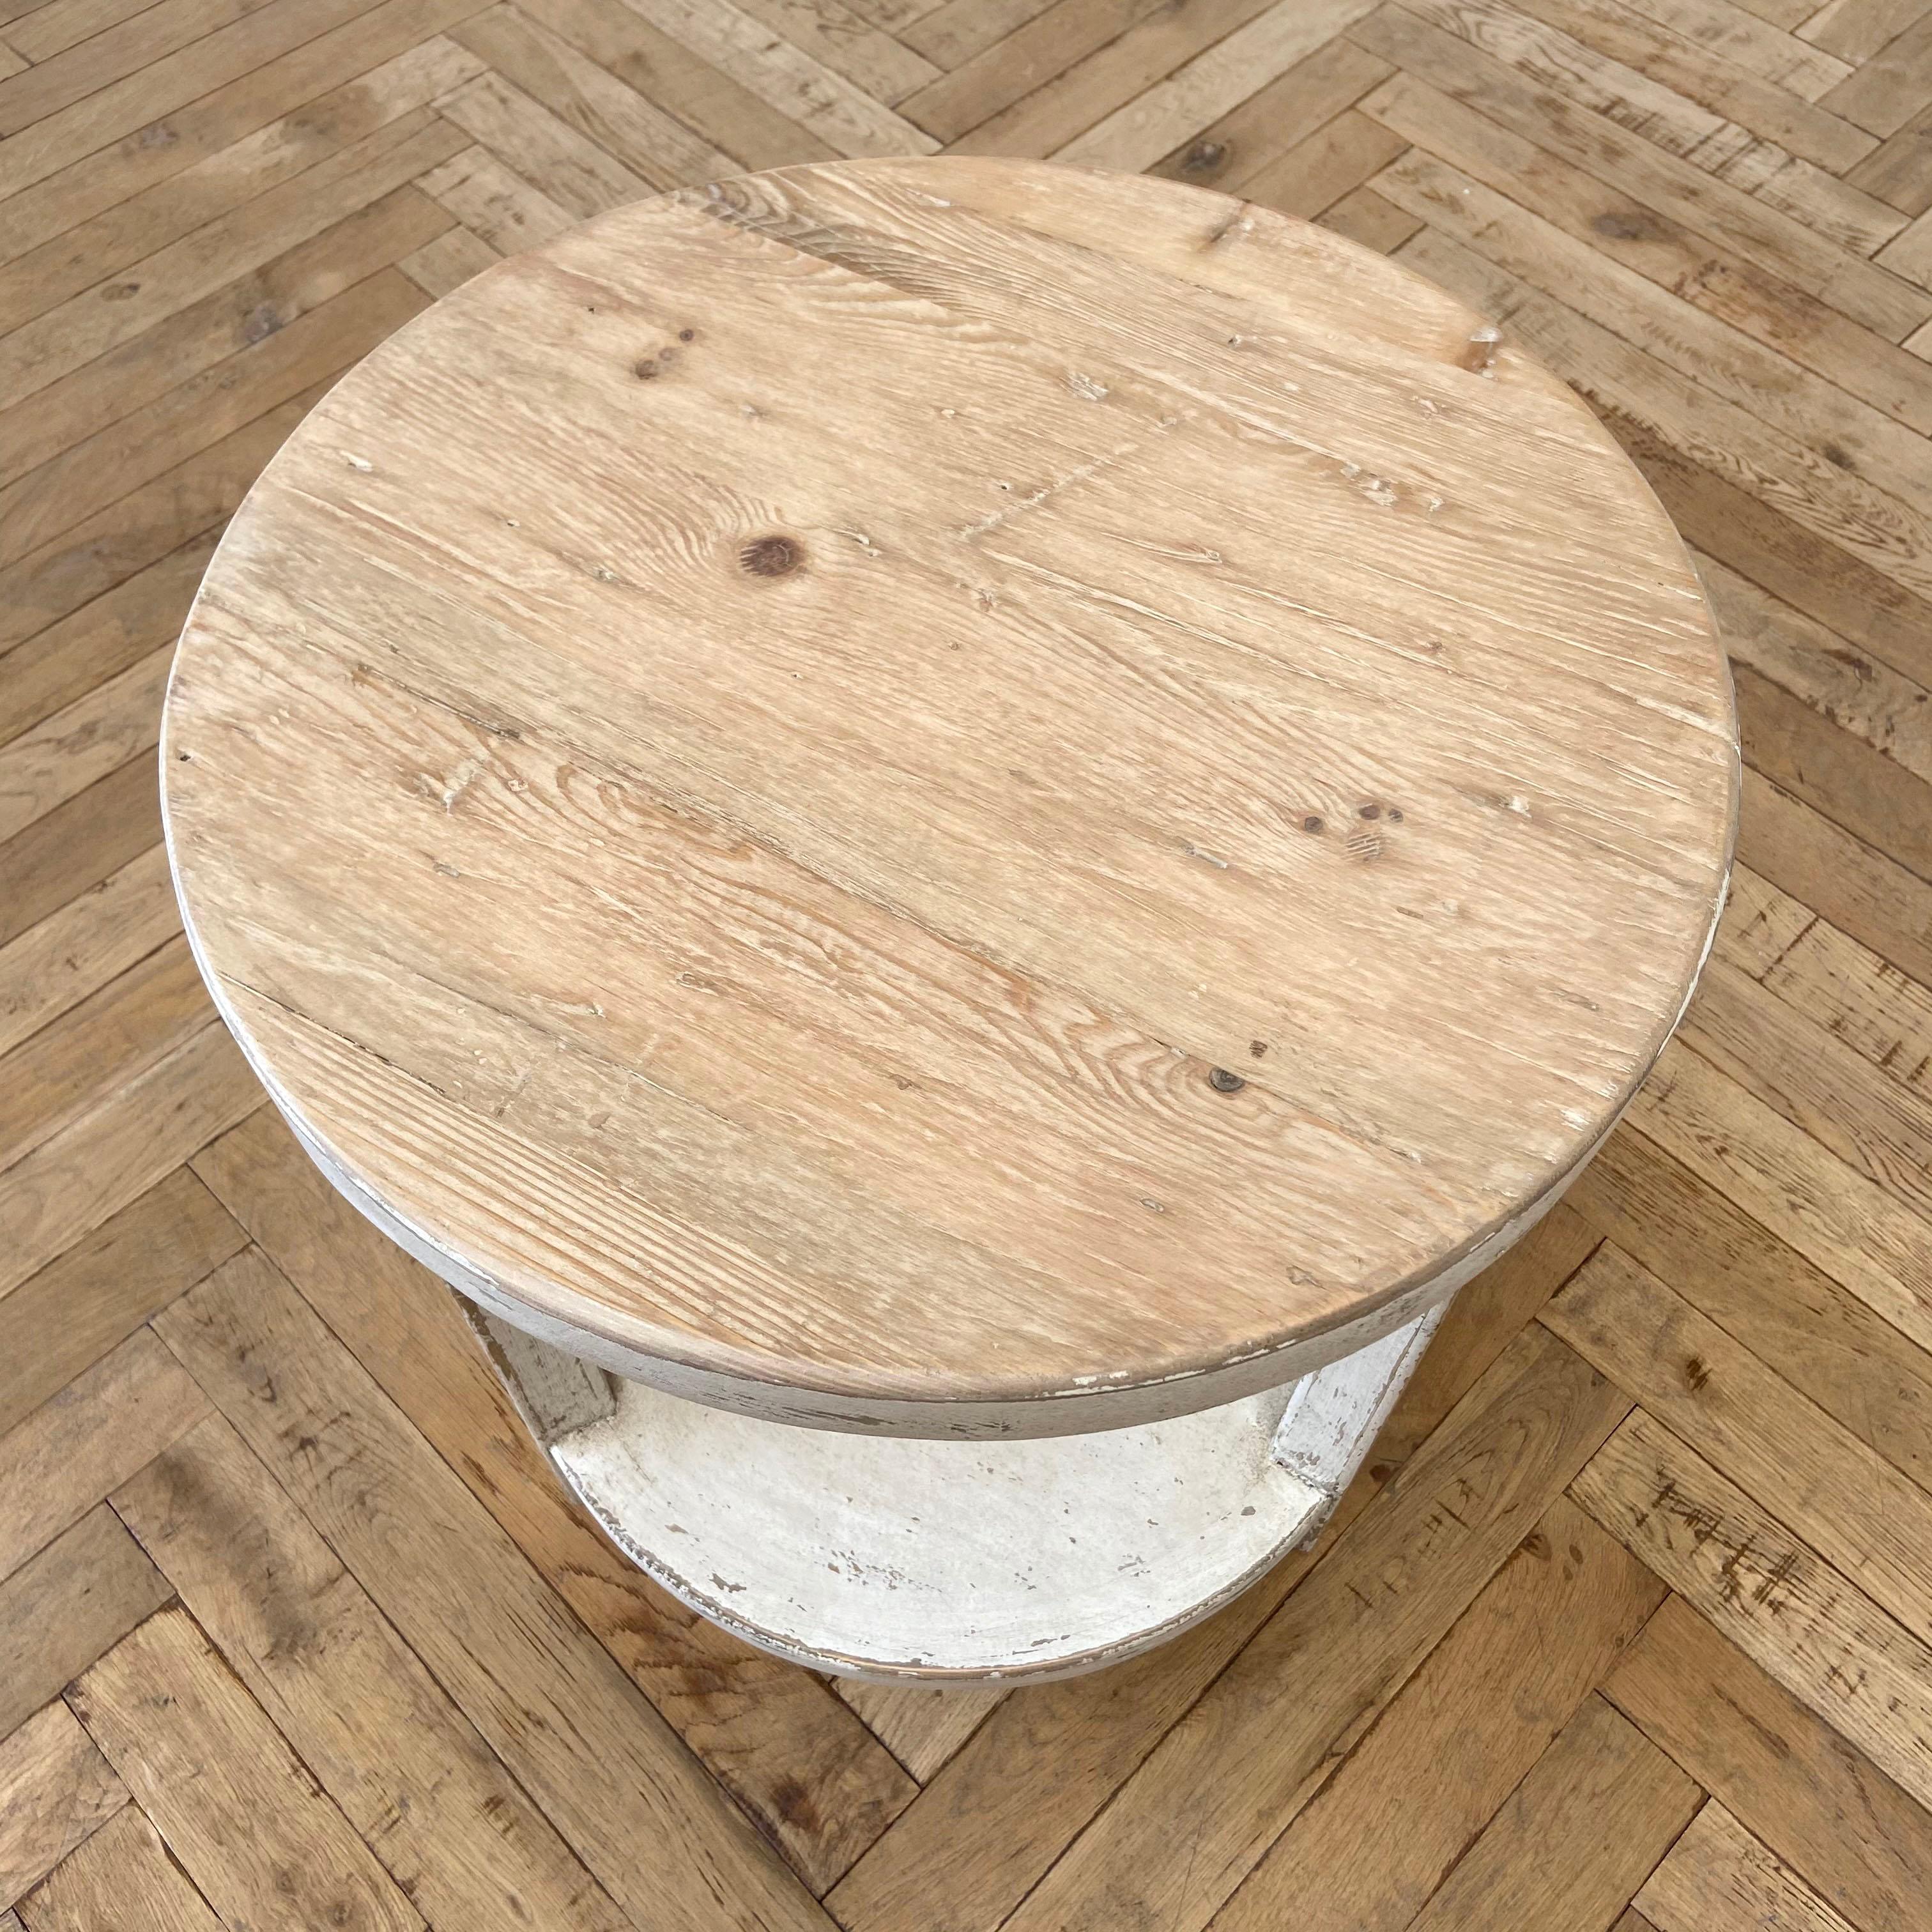 Reclaimed Pine Round Side Table with White Painted Legs In New Condition For Sale In Brea, CA